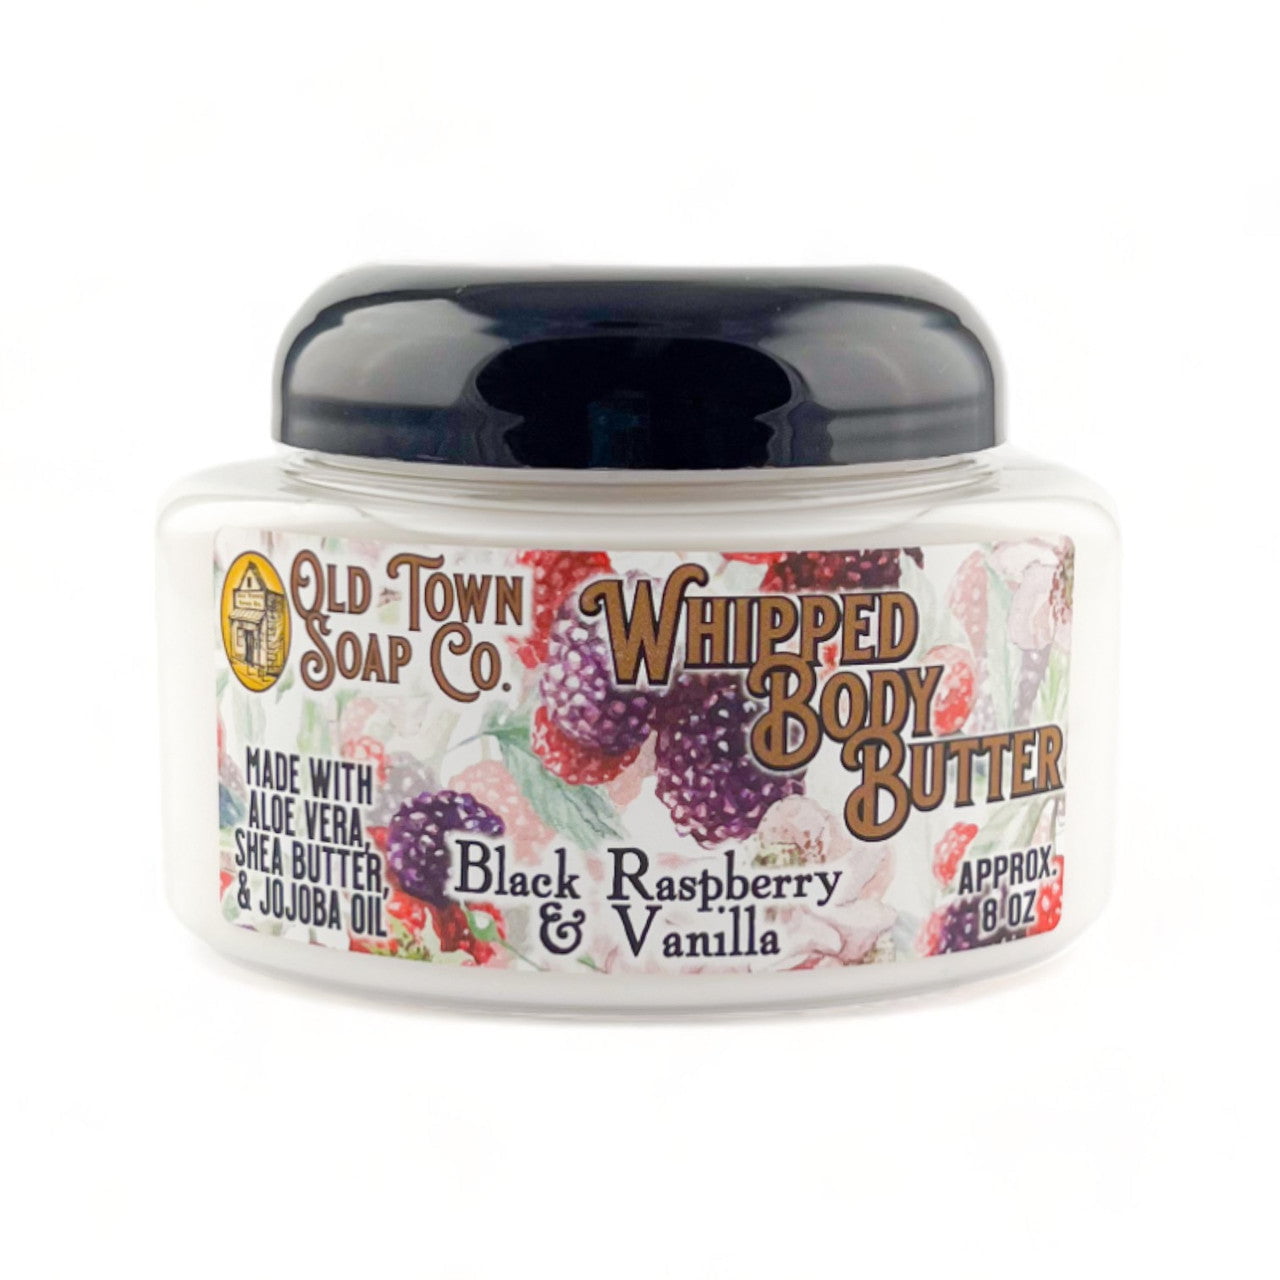 Black Raspberry Vanilla -Whipped Body Butter - Old Town Soap Co.